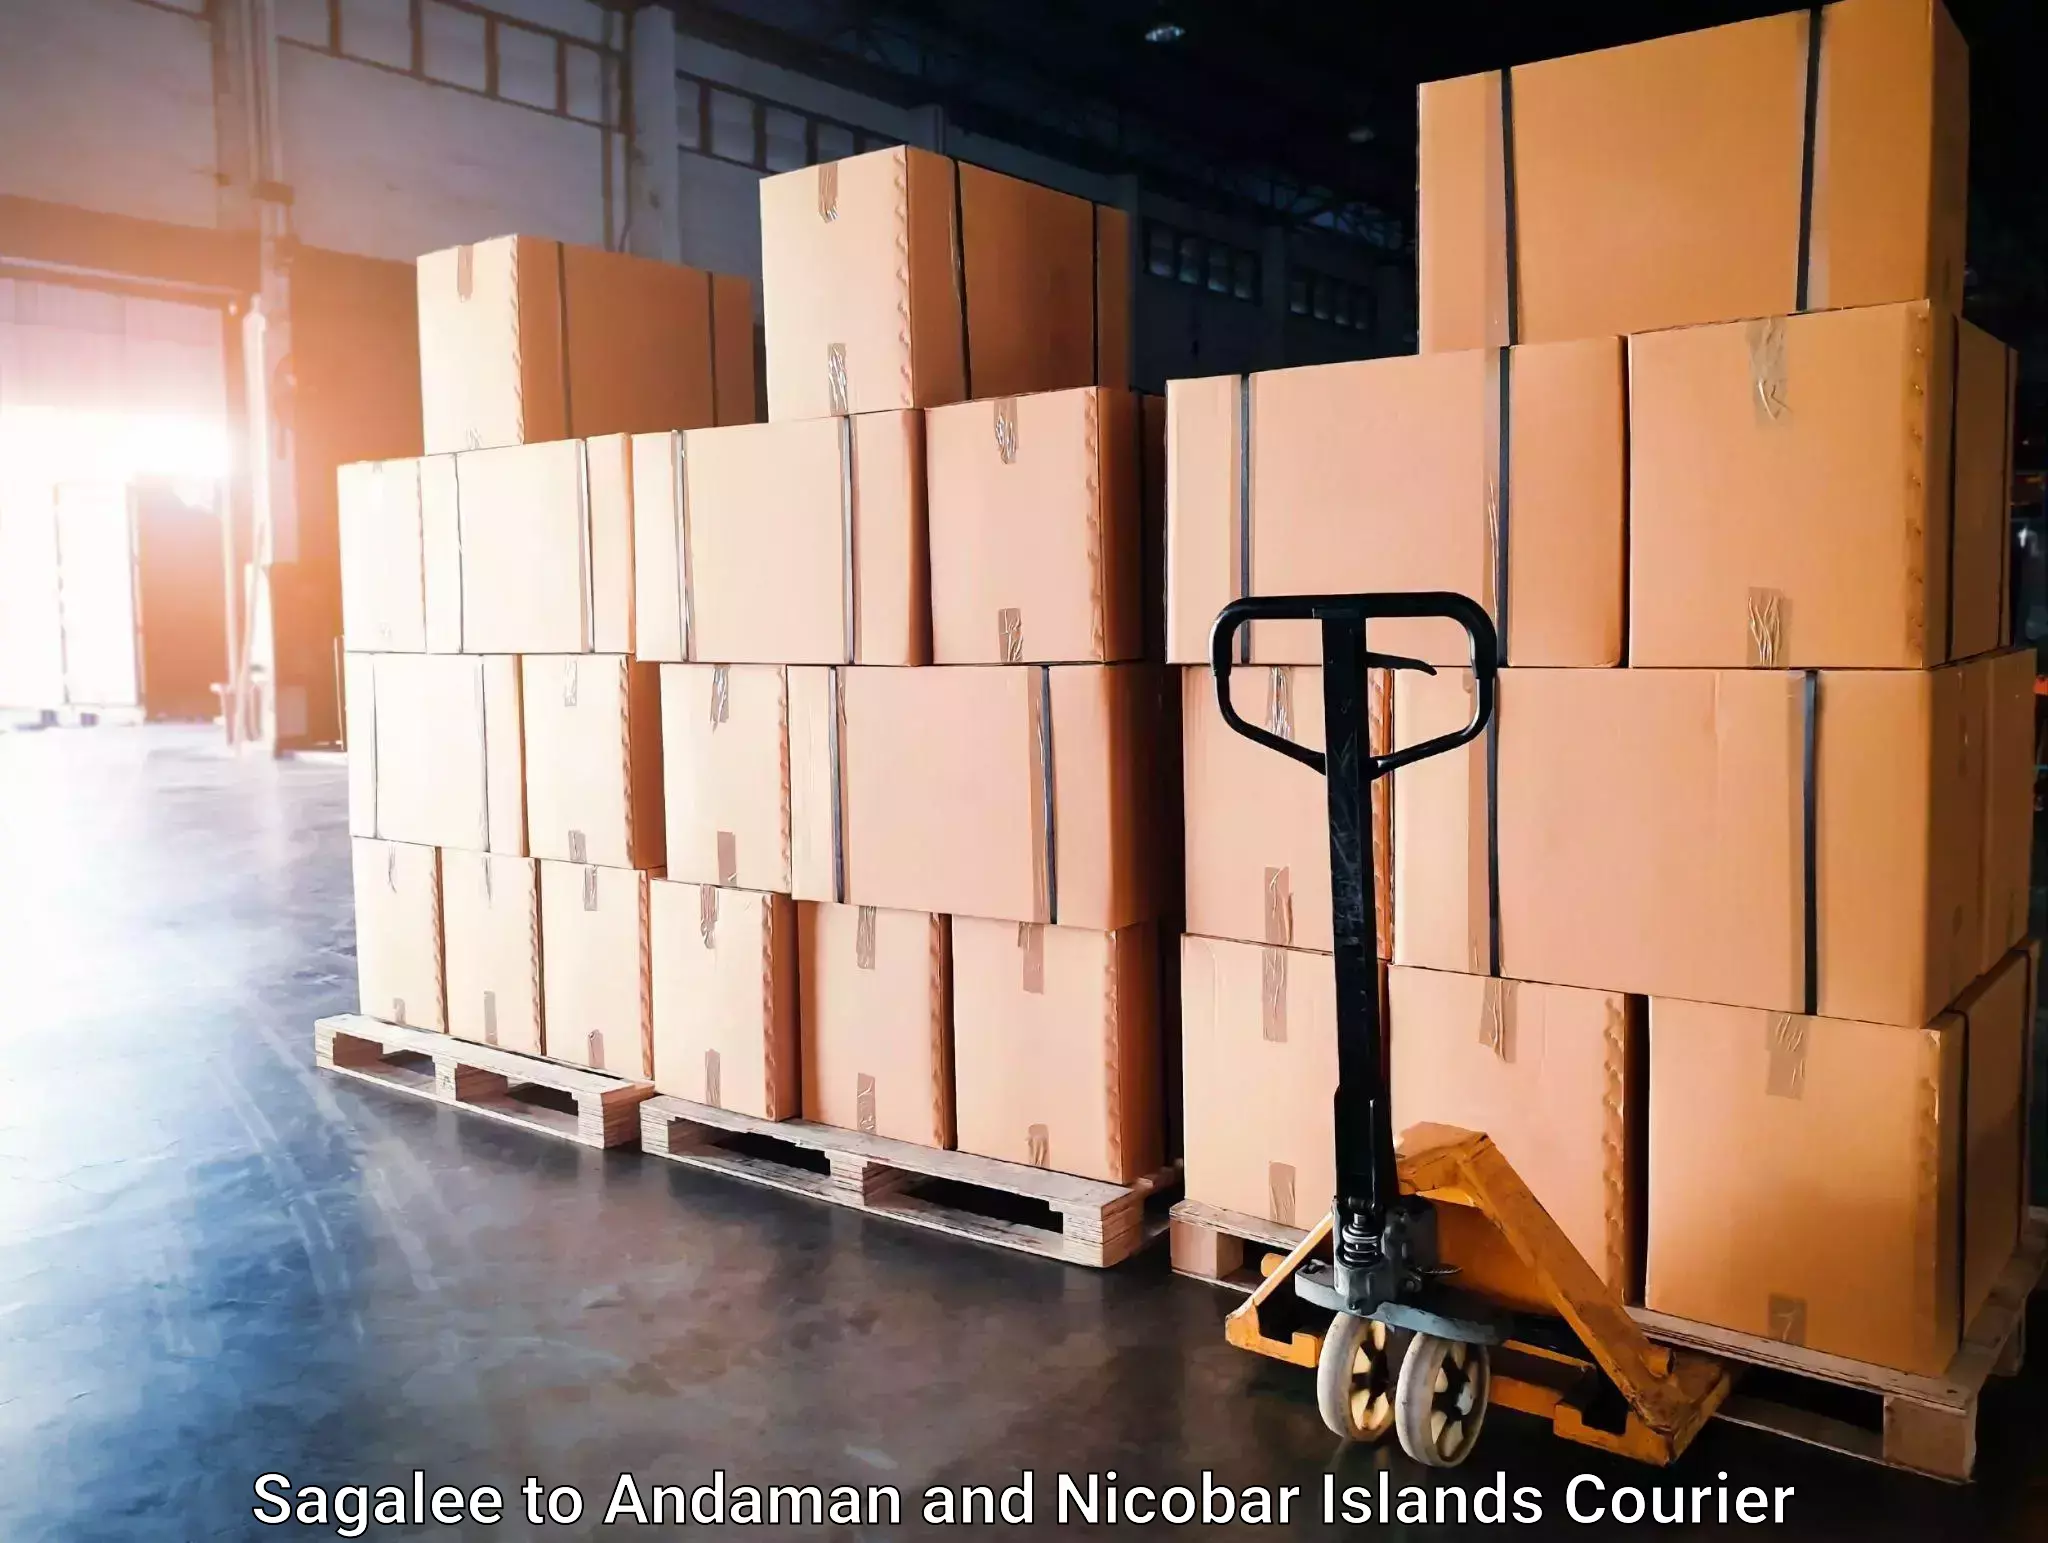 Local courier options in Sagalee to Andaman and Nicobar Islands